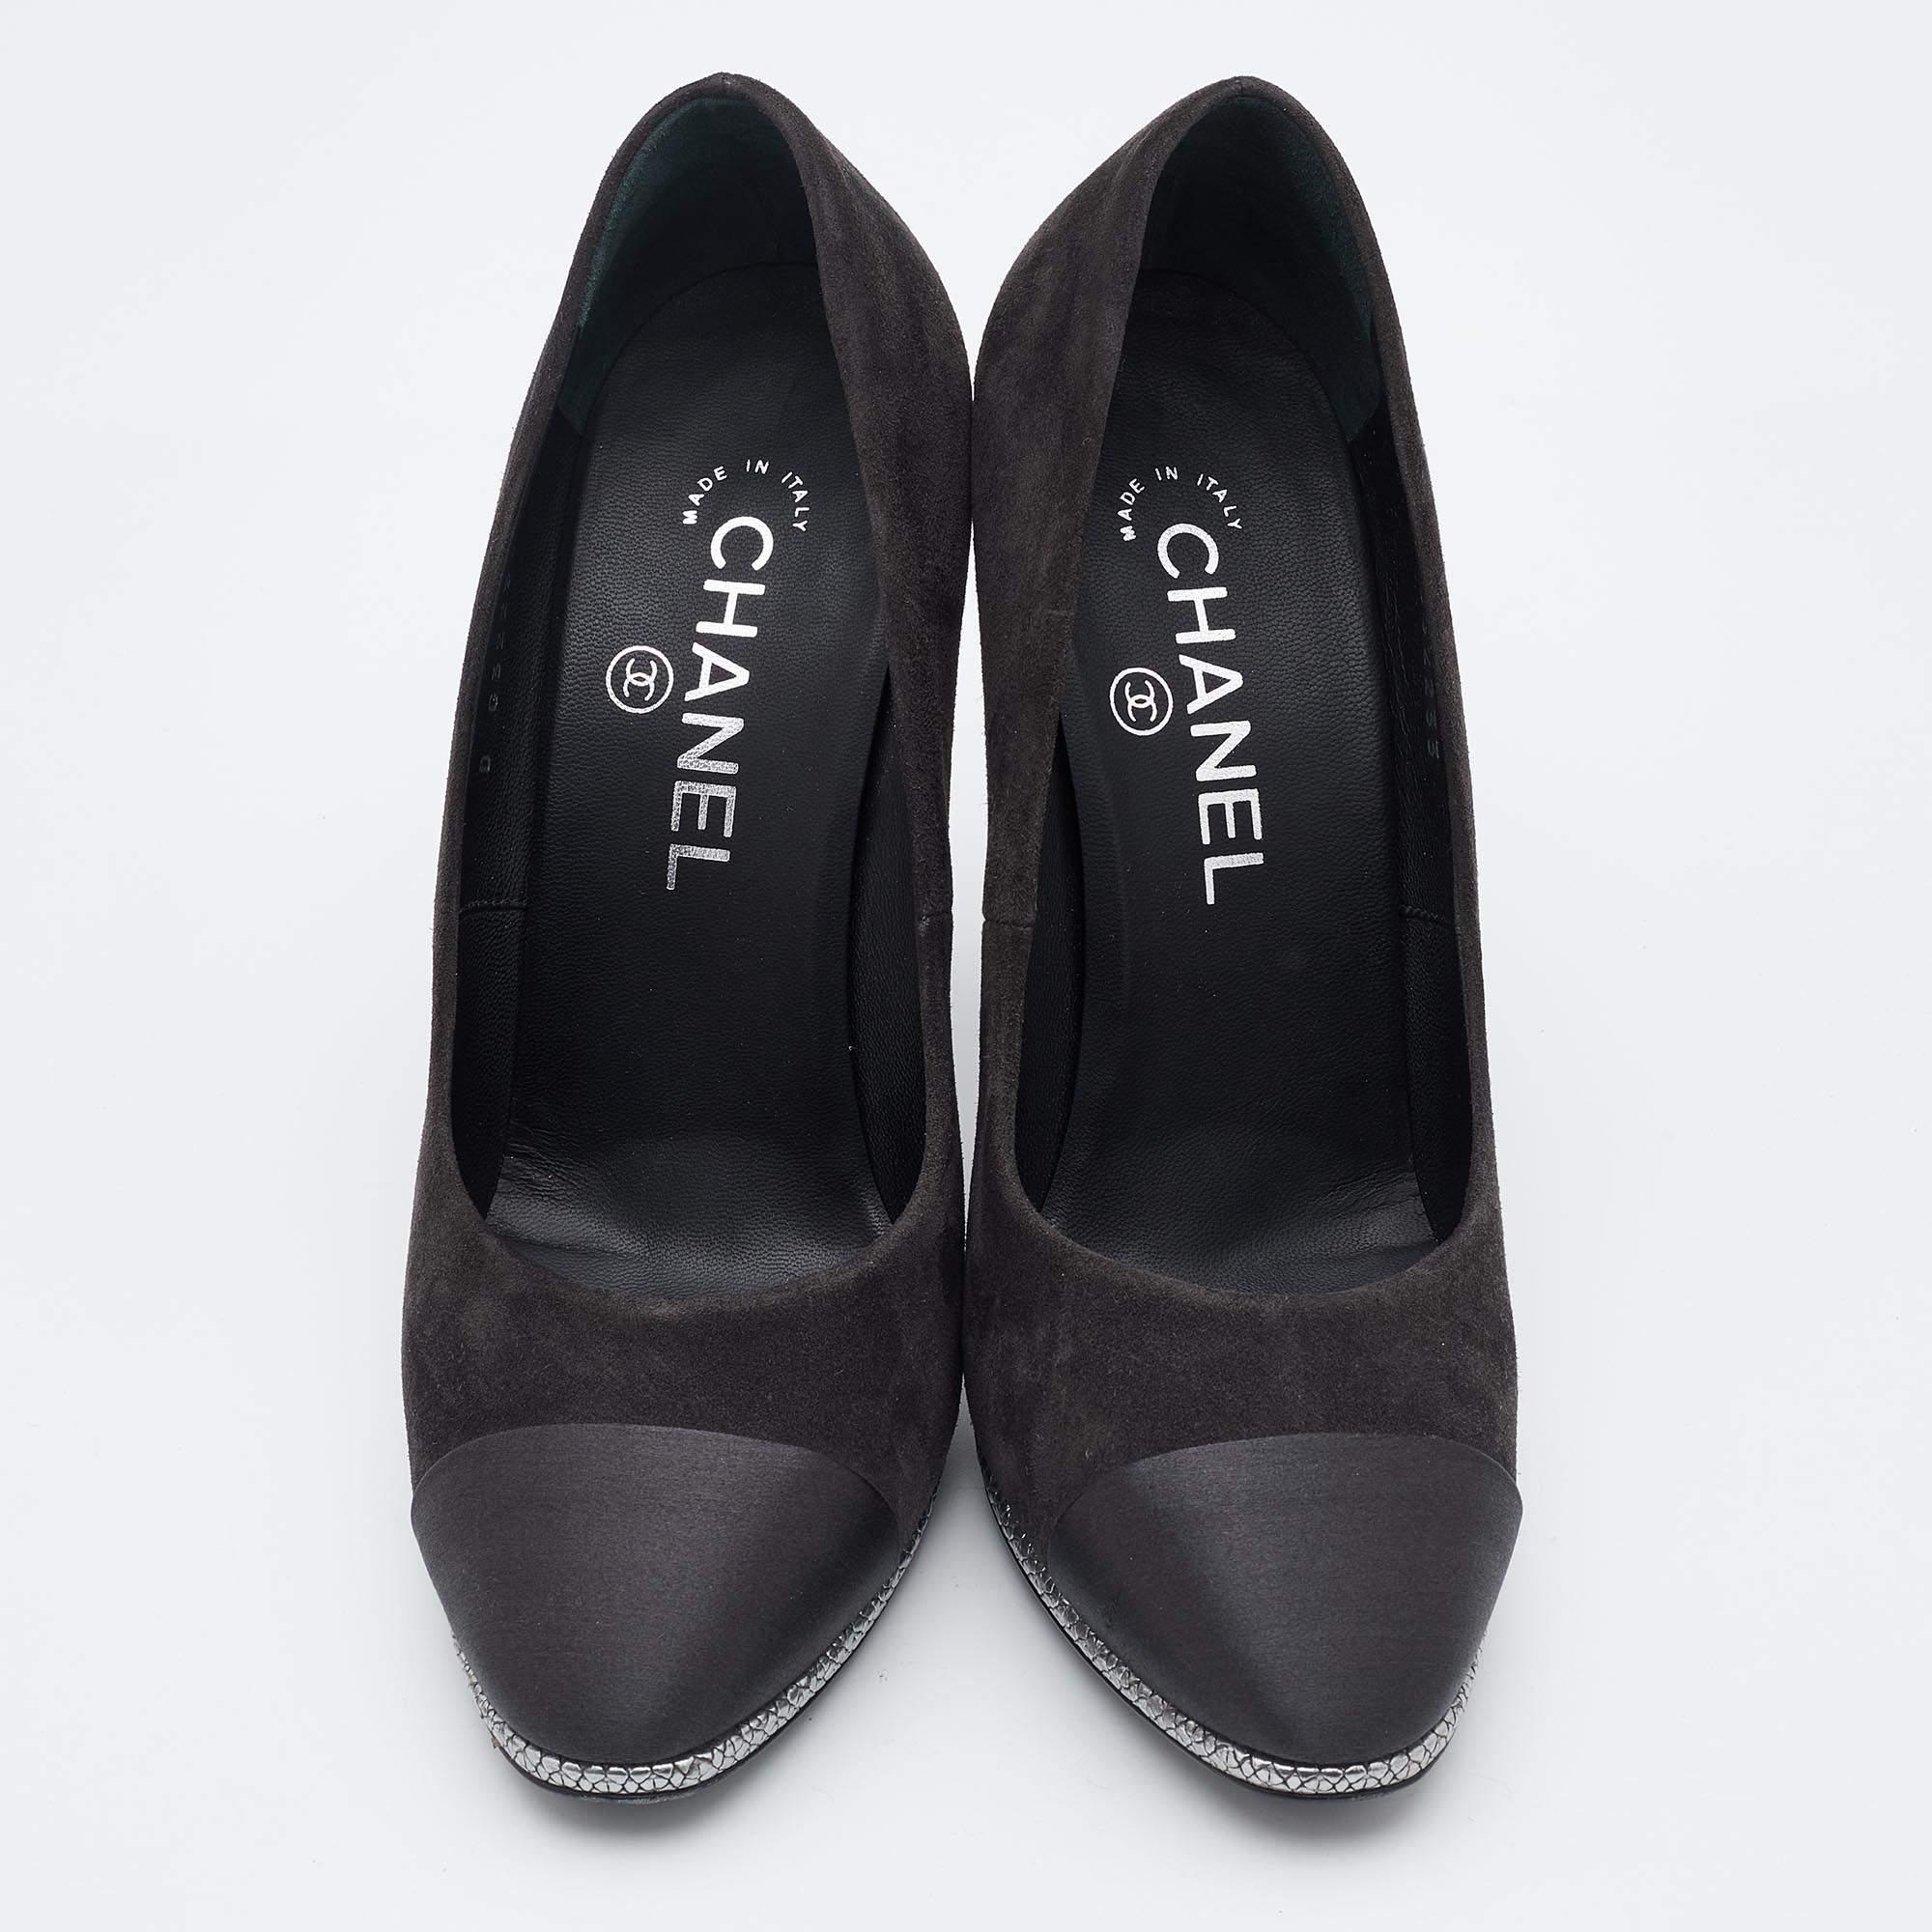 Be at the top your trend quotient by donning this pair of pumps, crafted from suede and satin. The elegant silhouette of these Chanel pumps will amp up your style quotient almost instantly. Stand out from the crowd while donning these exquisite